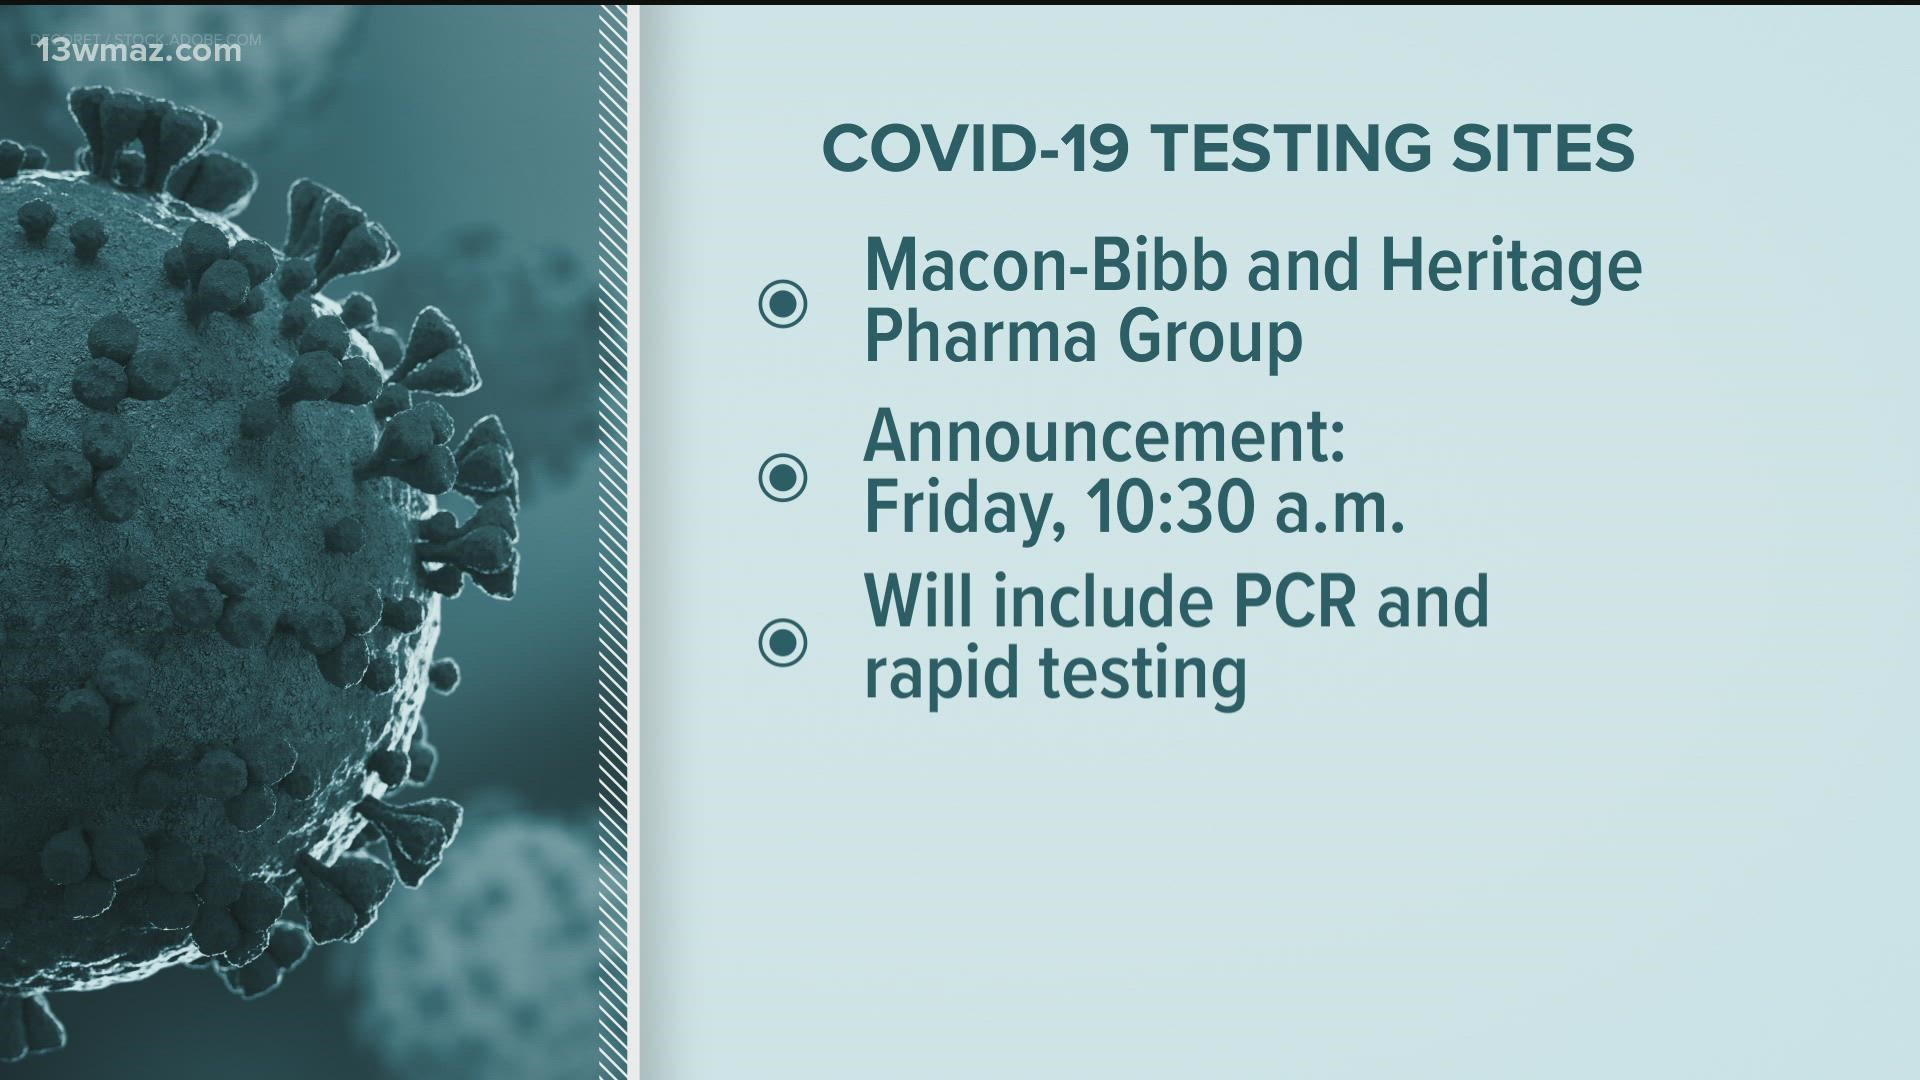 According to a news release from the county, the new sites will include both PRC and rapid testing.